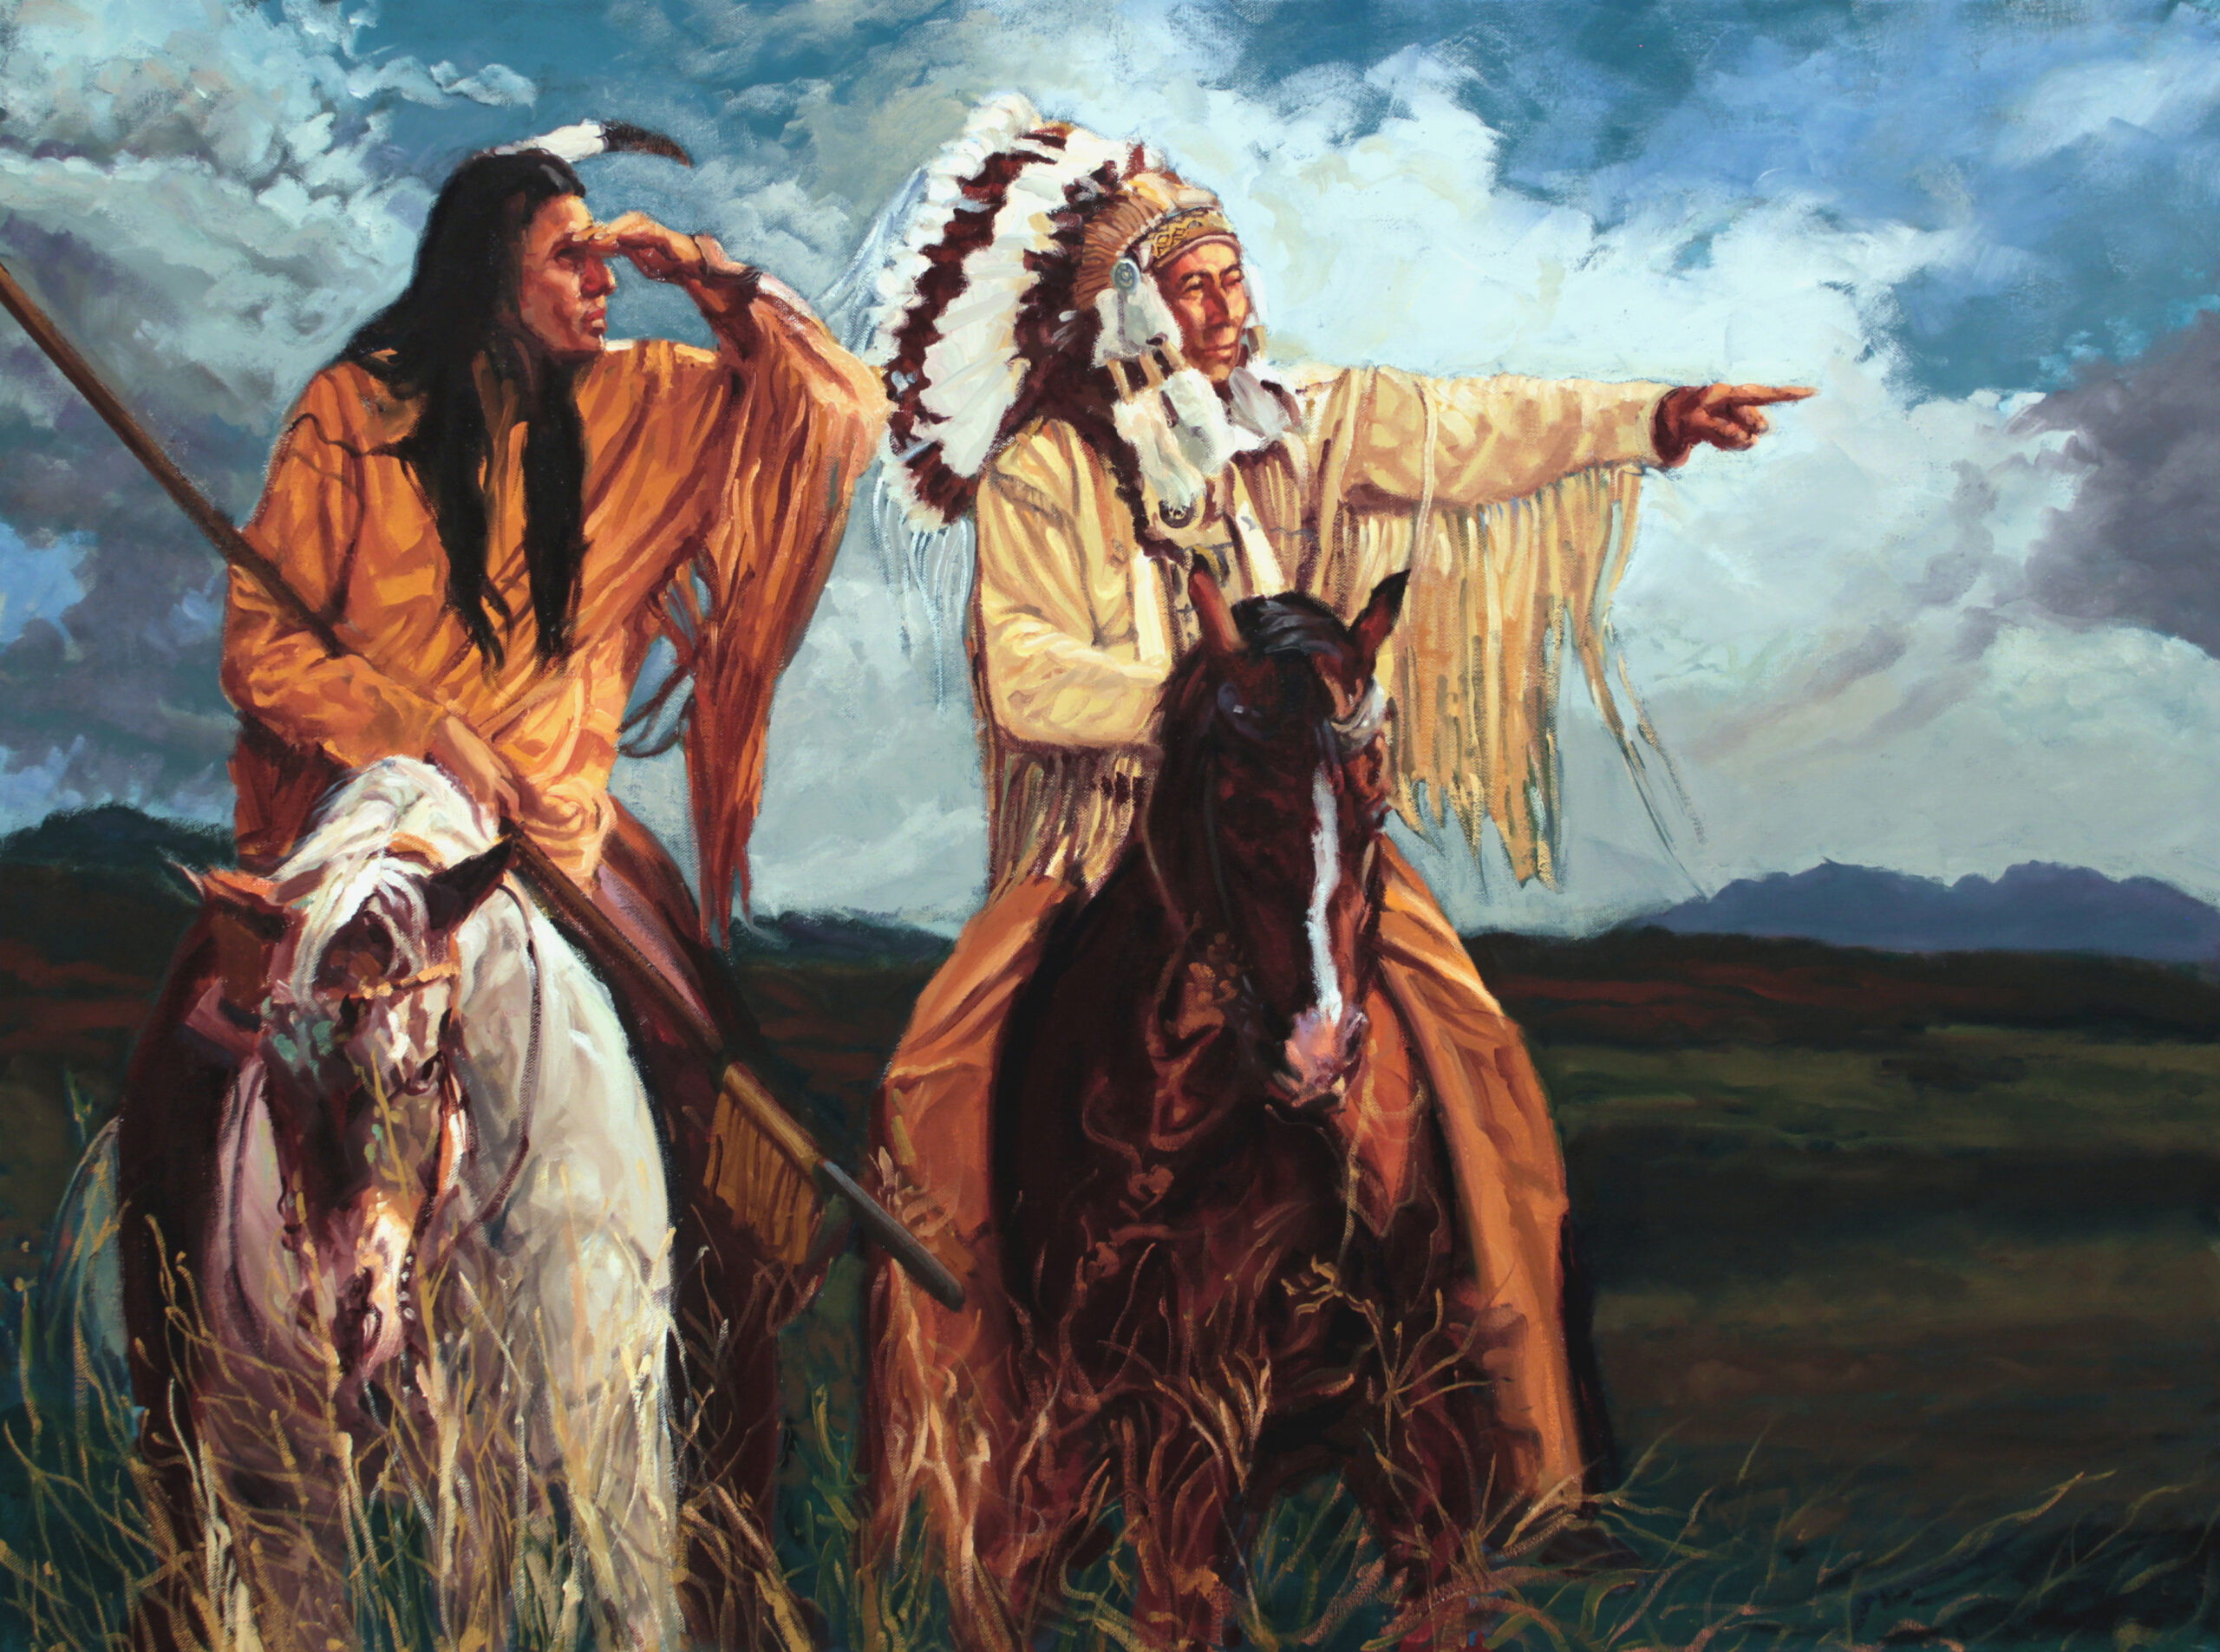 painting of two native americans on horseback, one is a scout, shielding his eyes and the other is a warrior pointing to the right